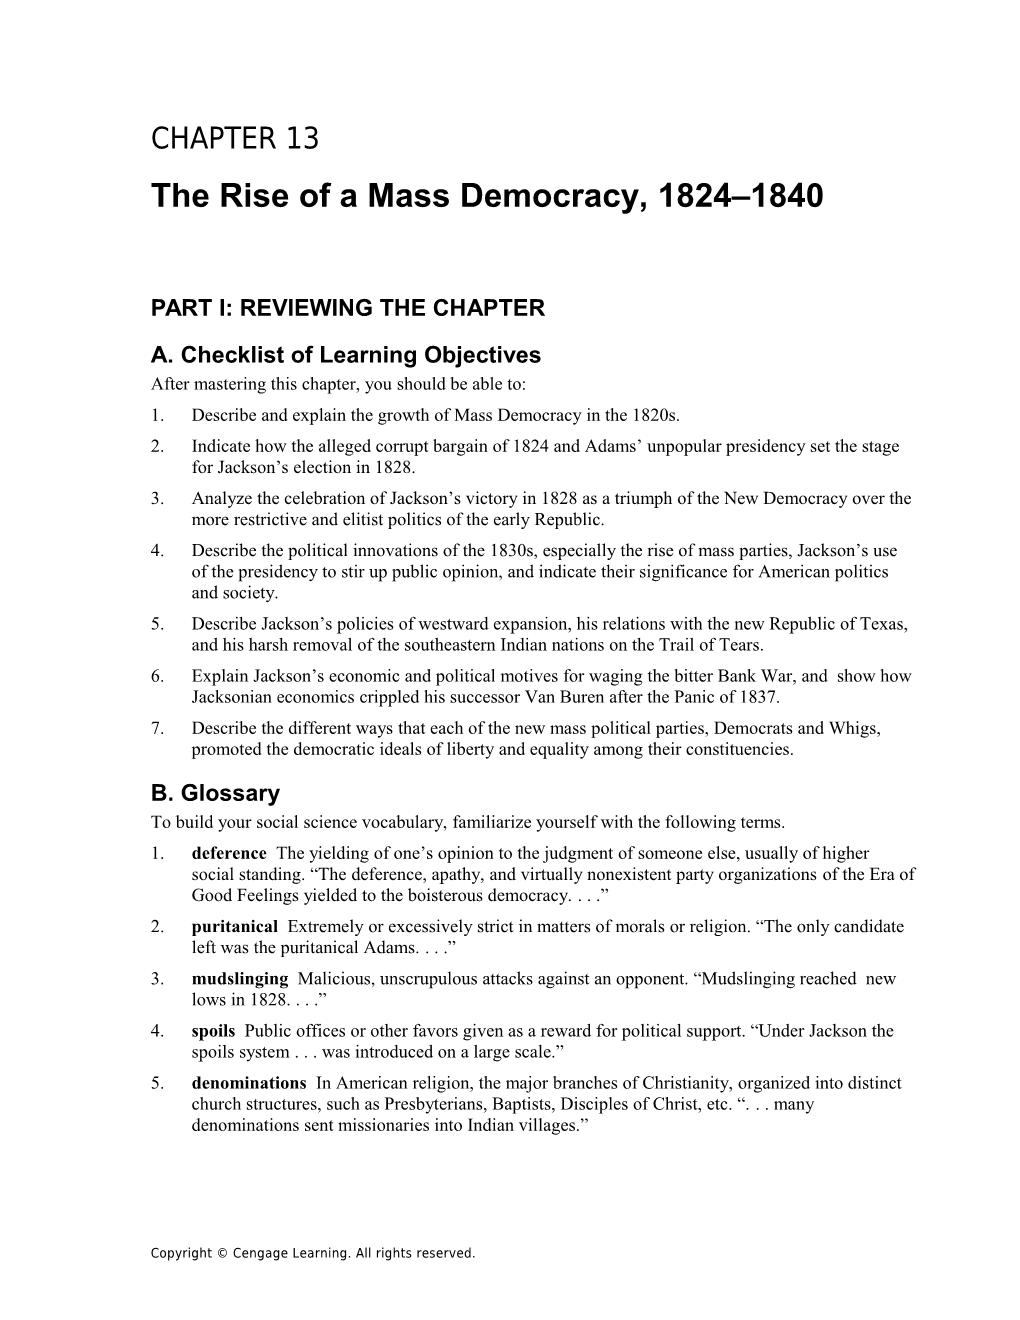 Chapter 13: the Rise of a Mass Democracy, 1824 1840 1